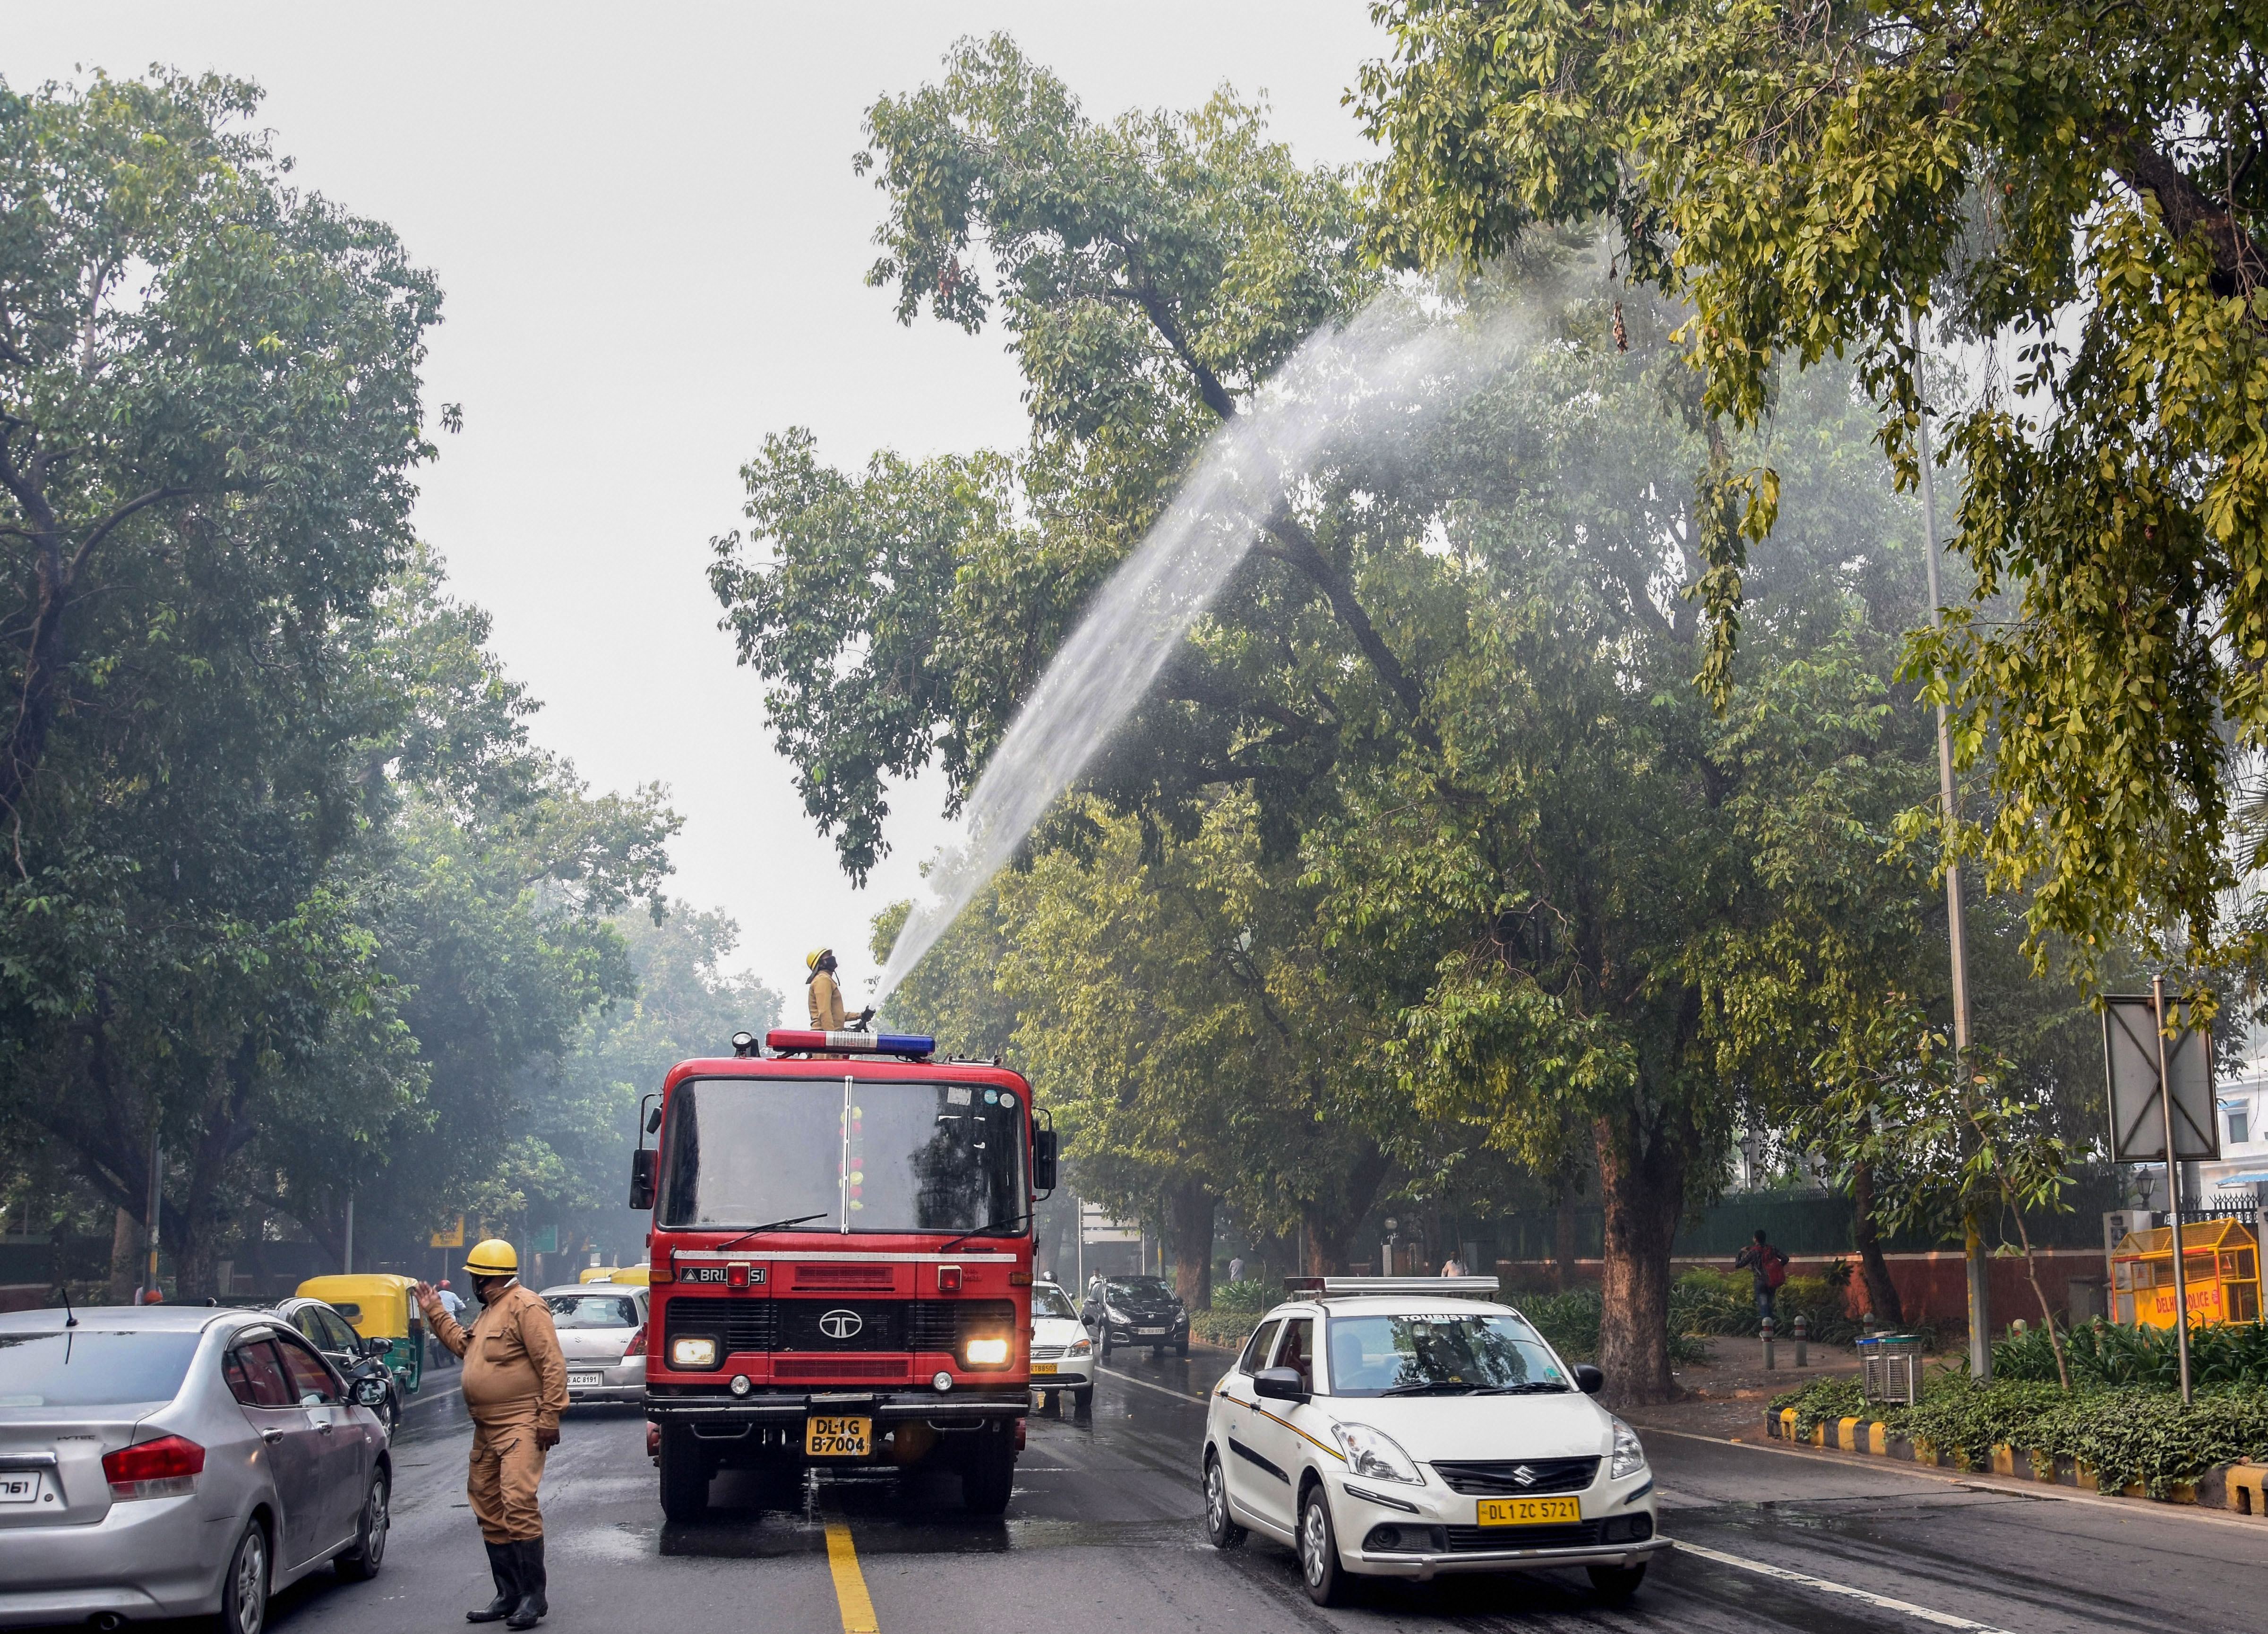 A NDMC fire service personnel sprays water on trees to curb the growing pollution in New Delhi, Wednesday, November 13, 2019.